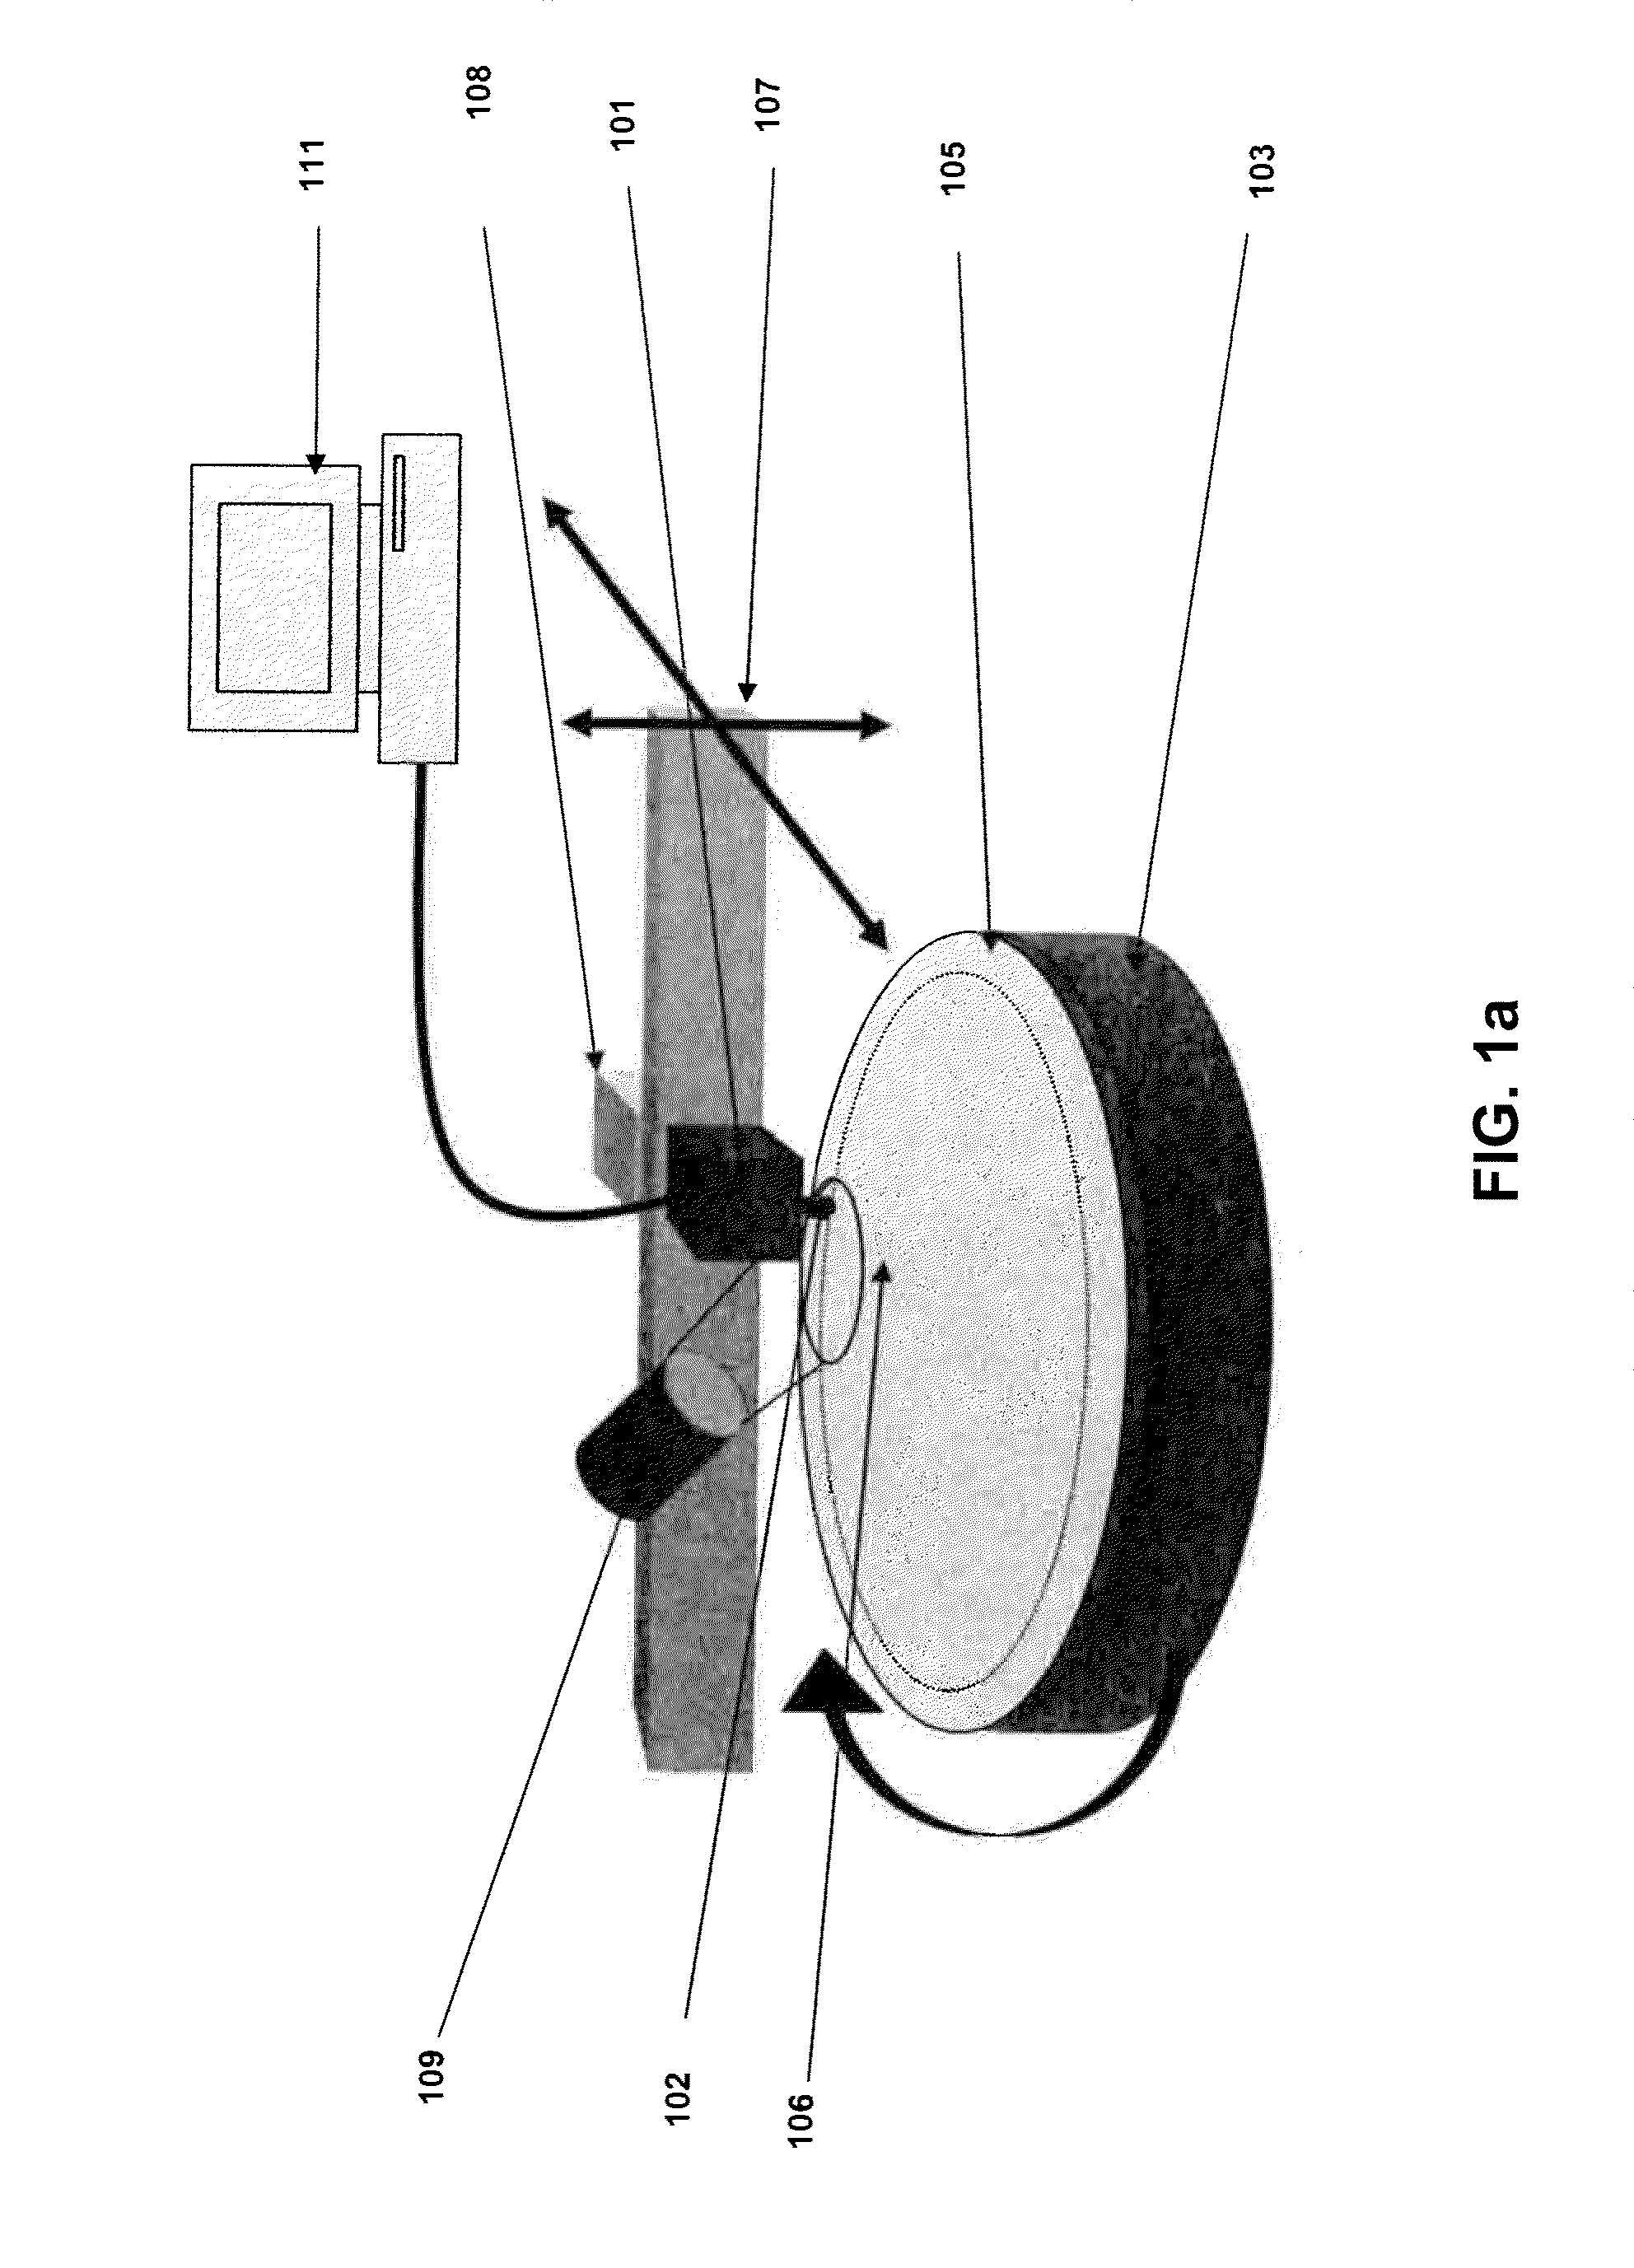 Semiconductor inspection system and apparatus utilizing a non-vibrating contact potential difference sensor and controlled illumination